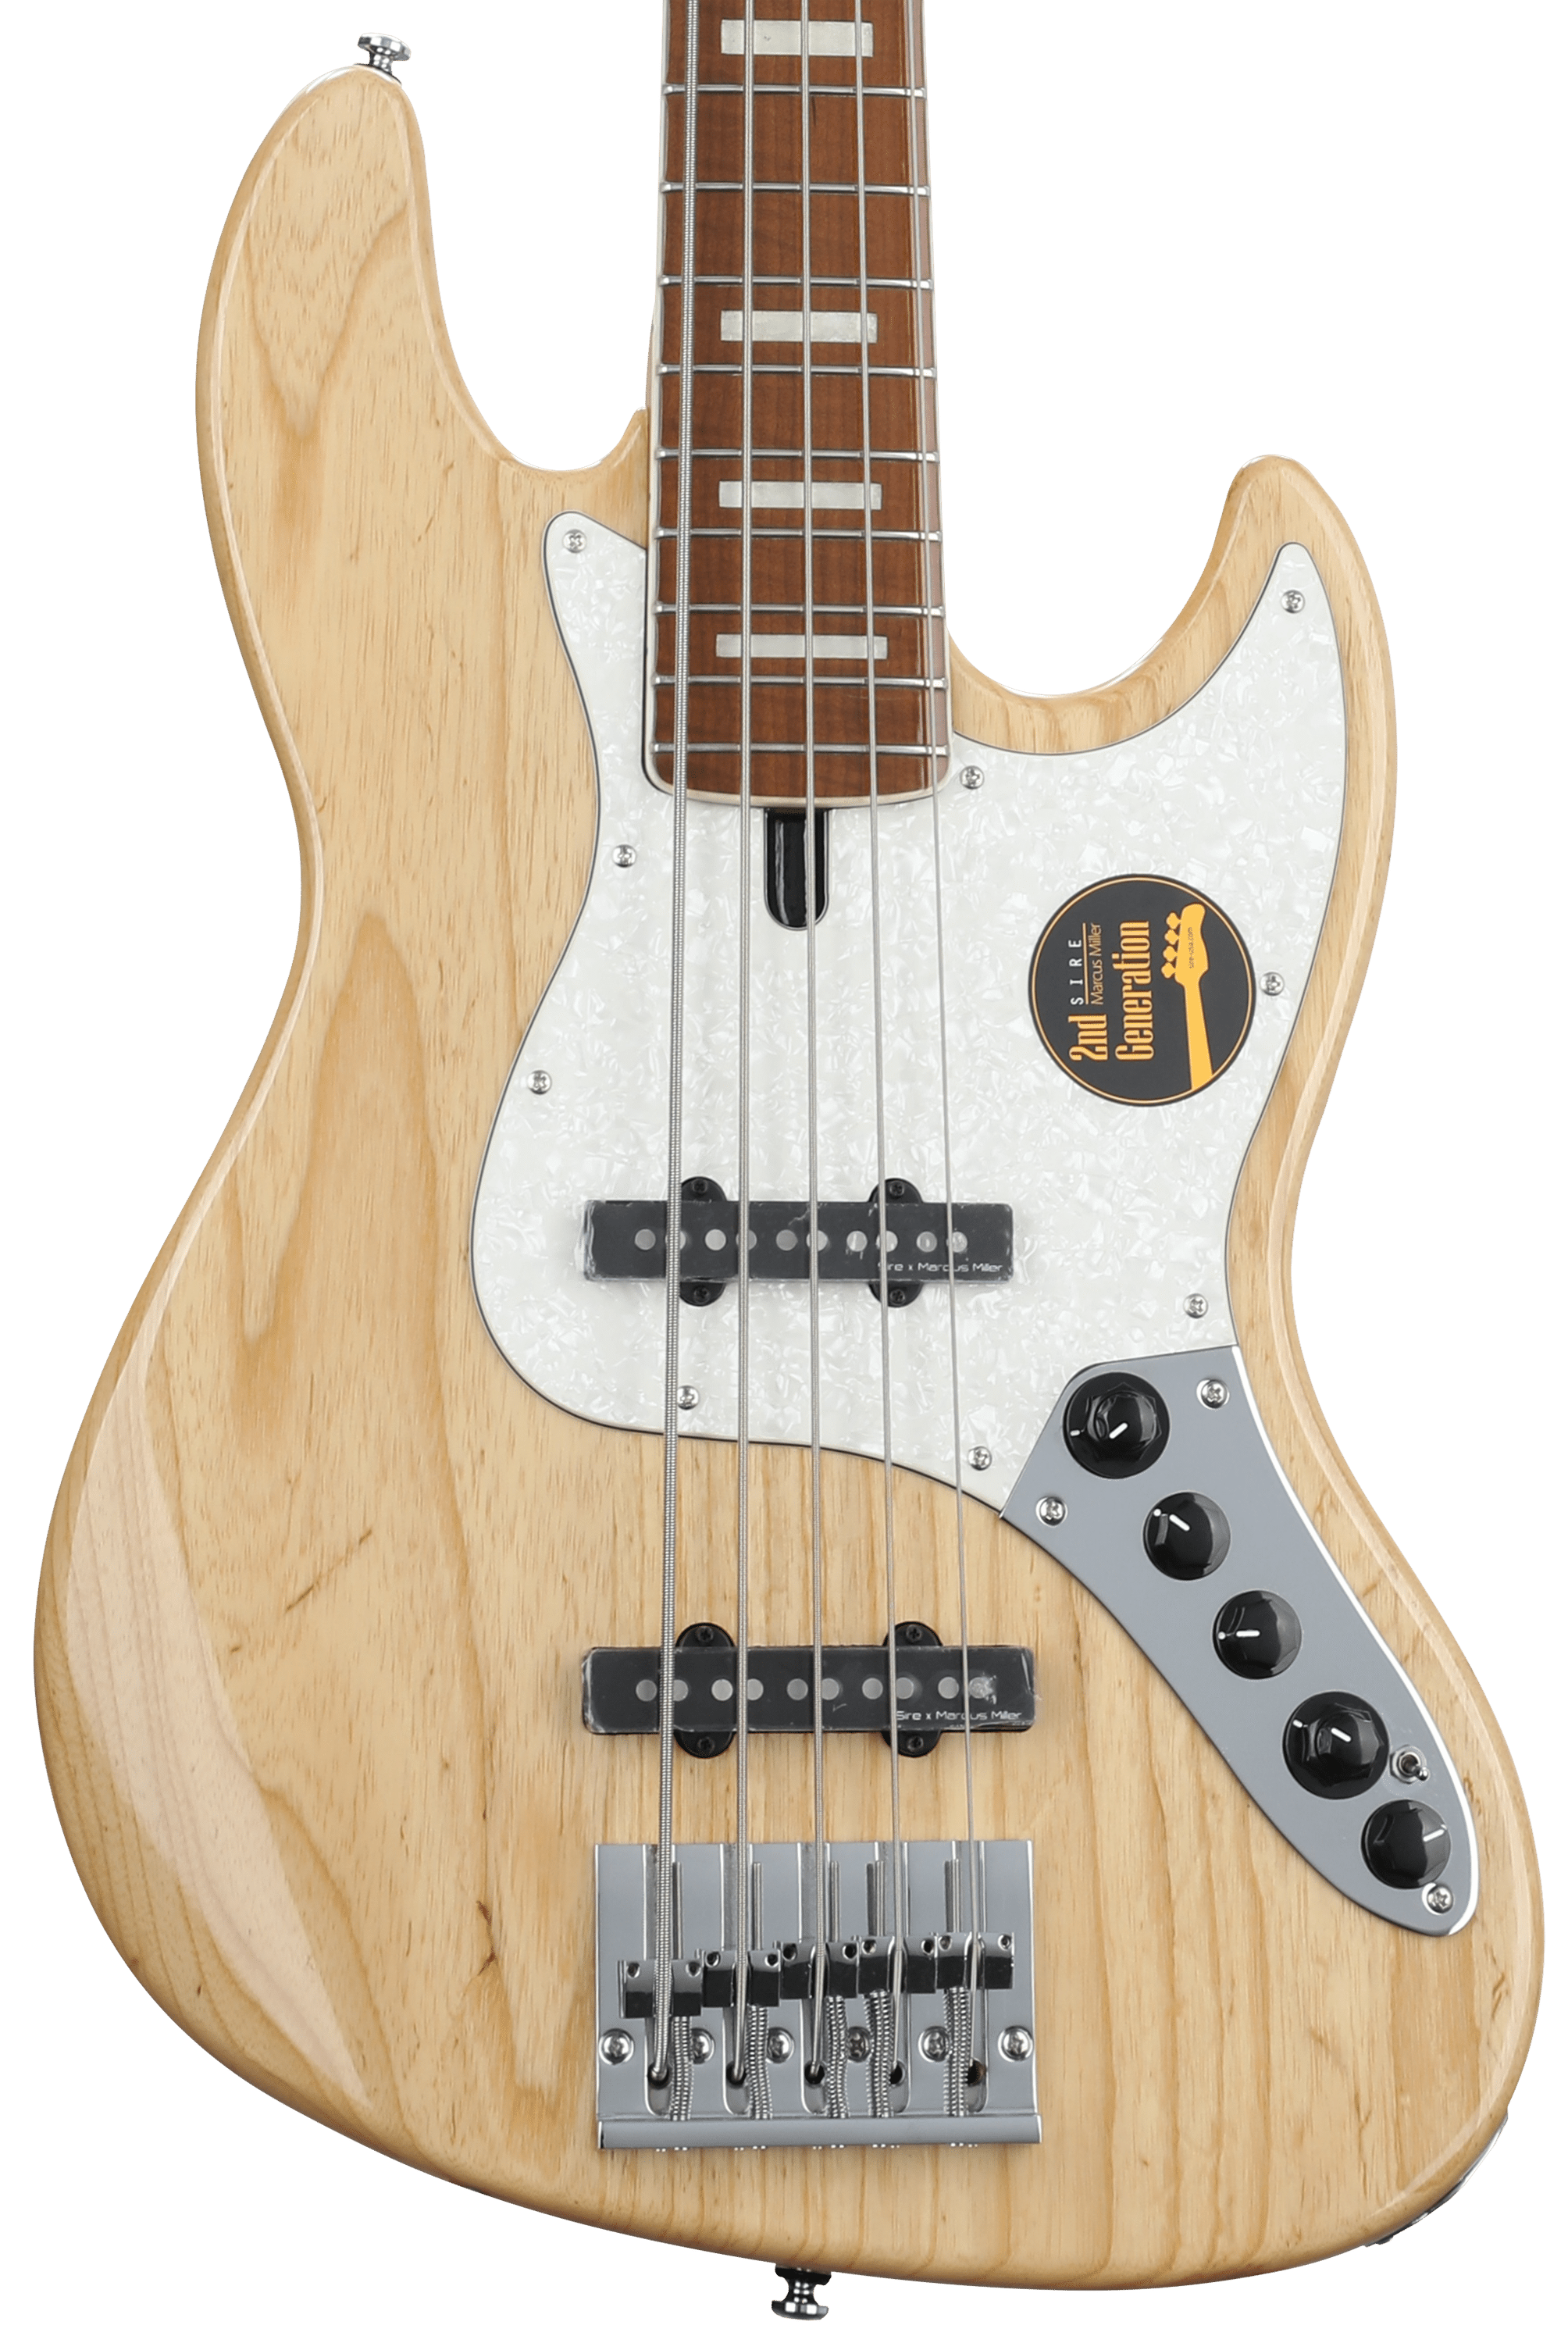 Sire Marcus Miller V8 5-string Bass Guitar - Natural